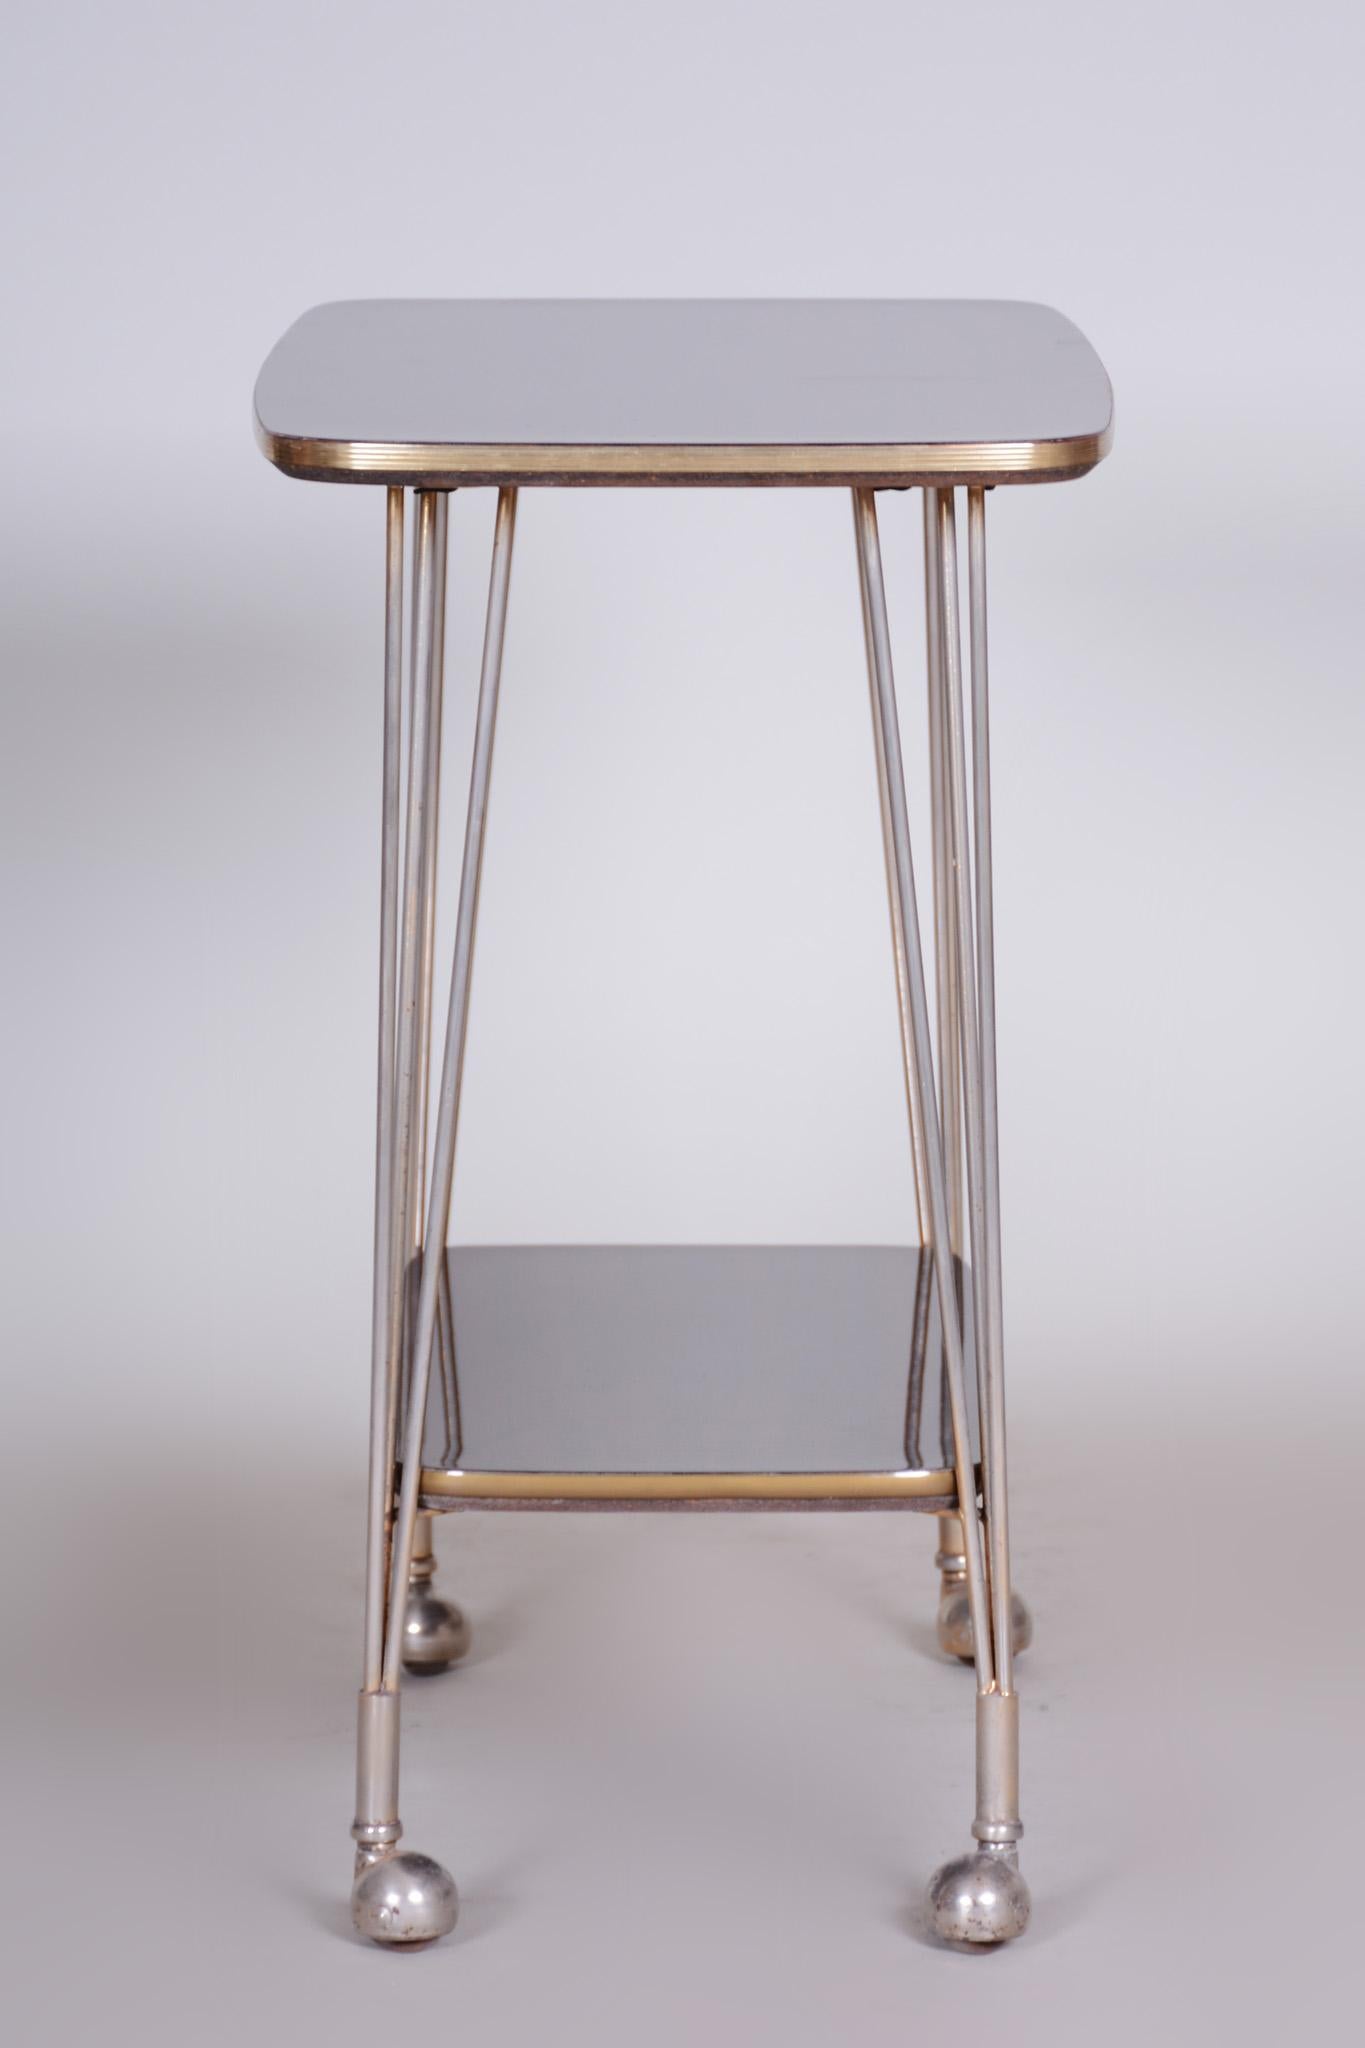 20th Century Art Deco Mahogany Trolley Table, Brass, Excellent Condition, 1950s For Sale 1